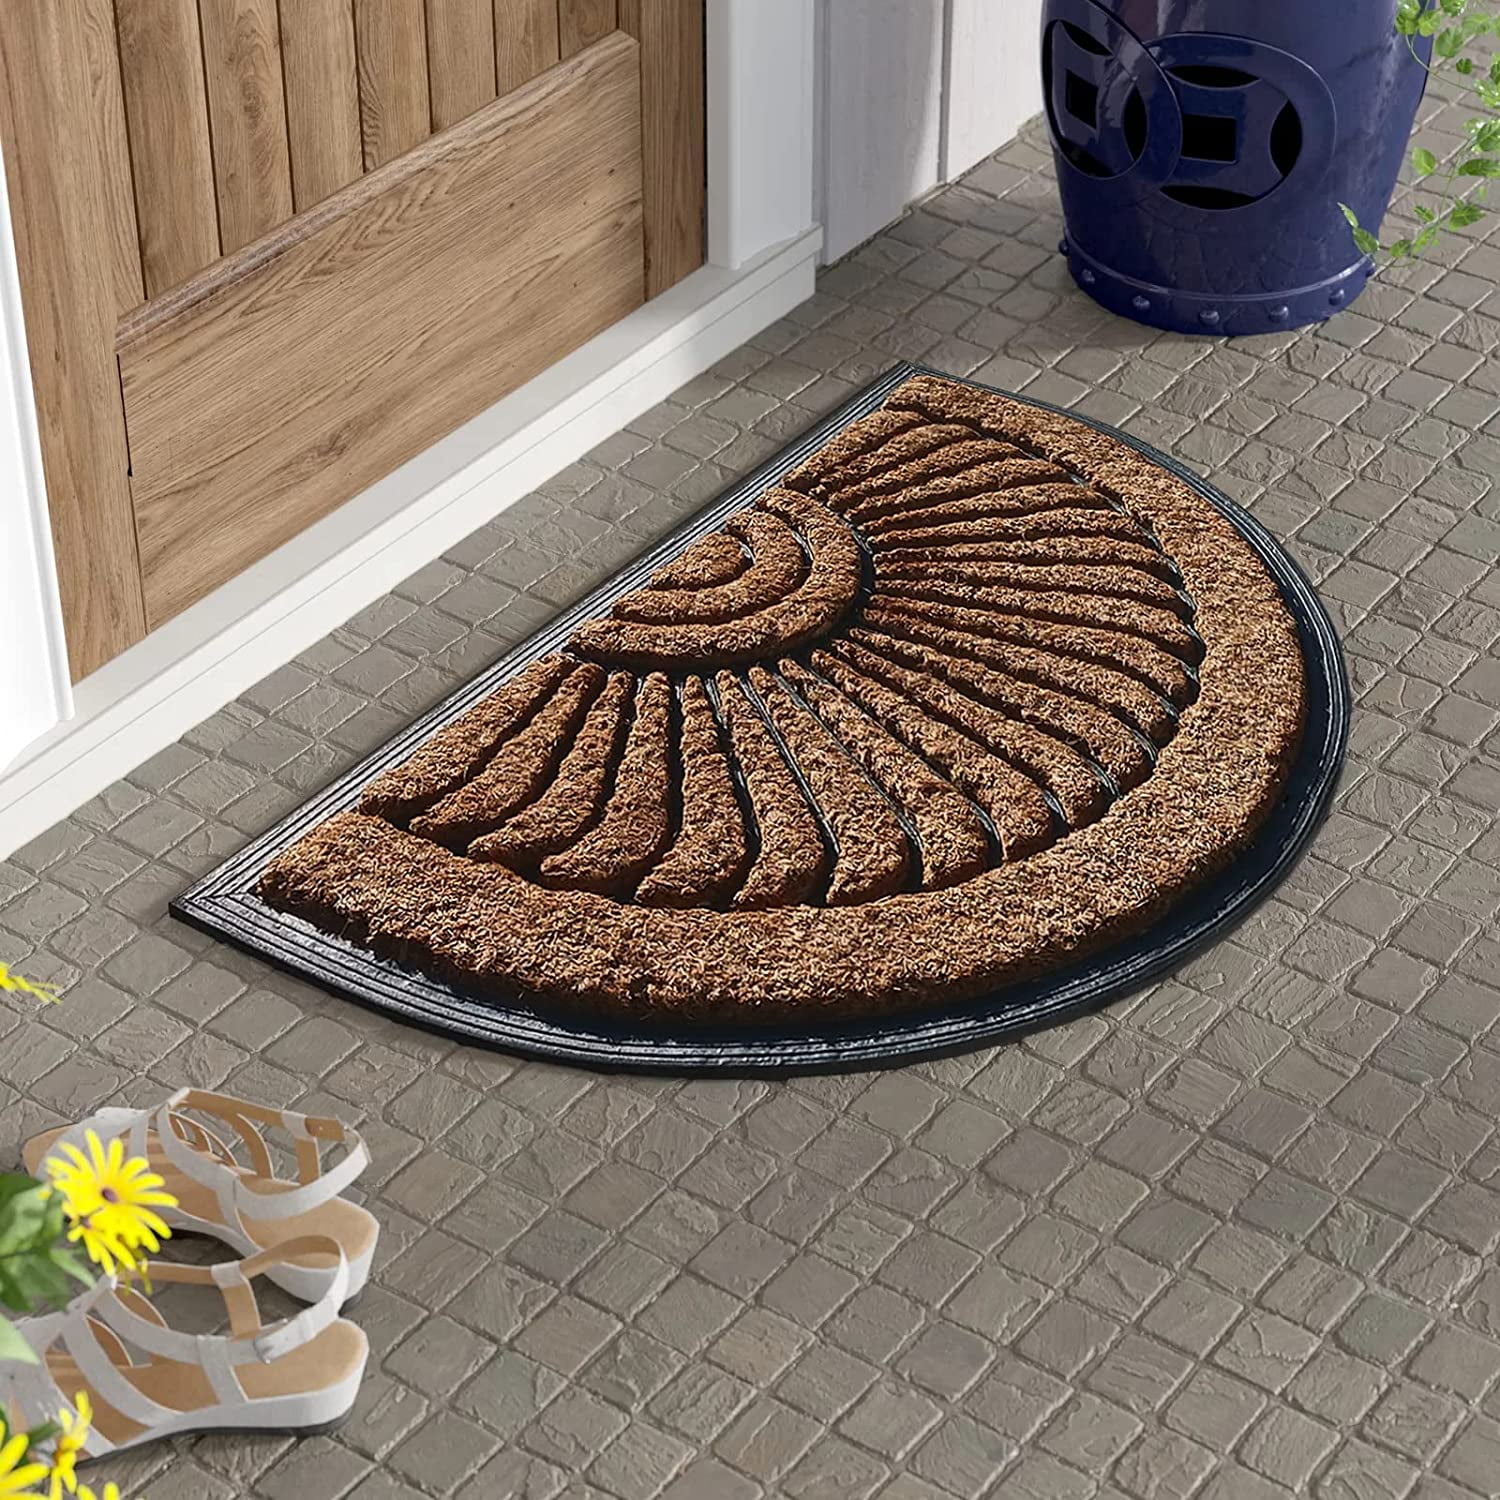 A1 Home Collections A1hc Welcome Flocked Entrance Door Mats Black/Beige 30 in. x 60 in. Rubber & Coir, Heavy Duty, Extra Large Size Doormat